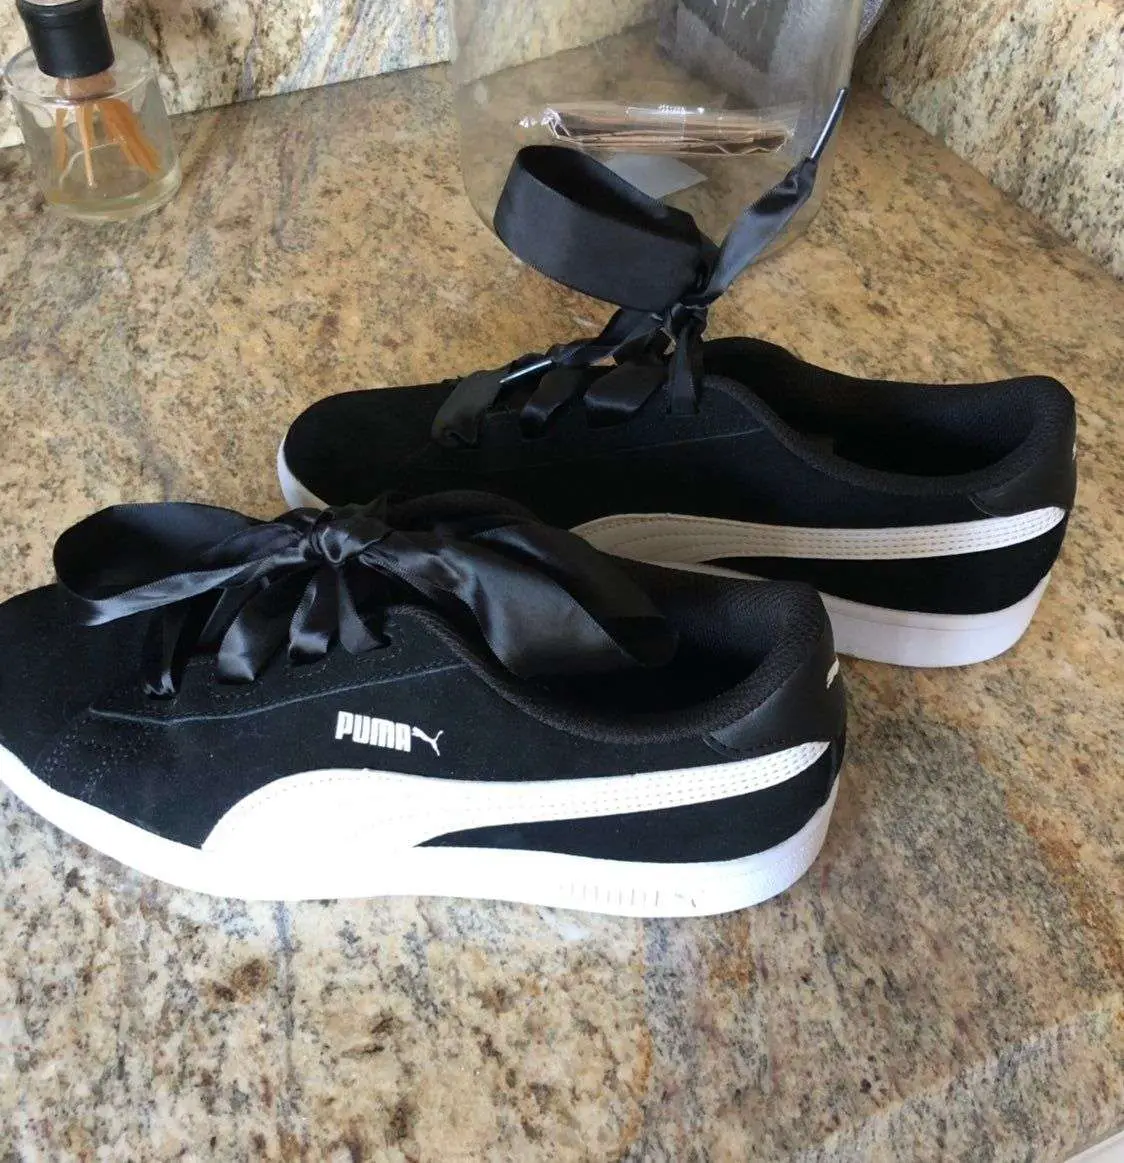 These Black Puma shoes are super cute with the shoelaces making a cute ...